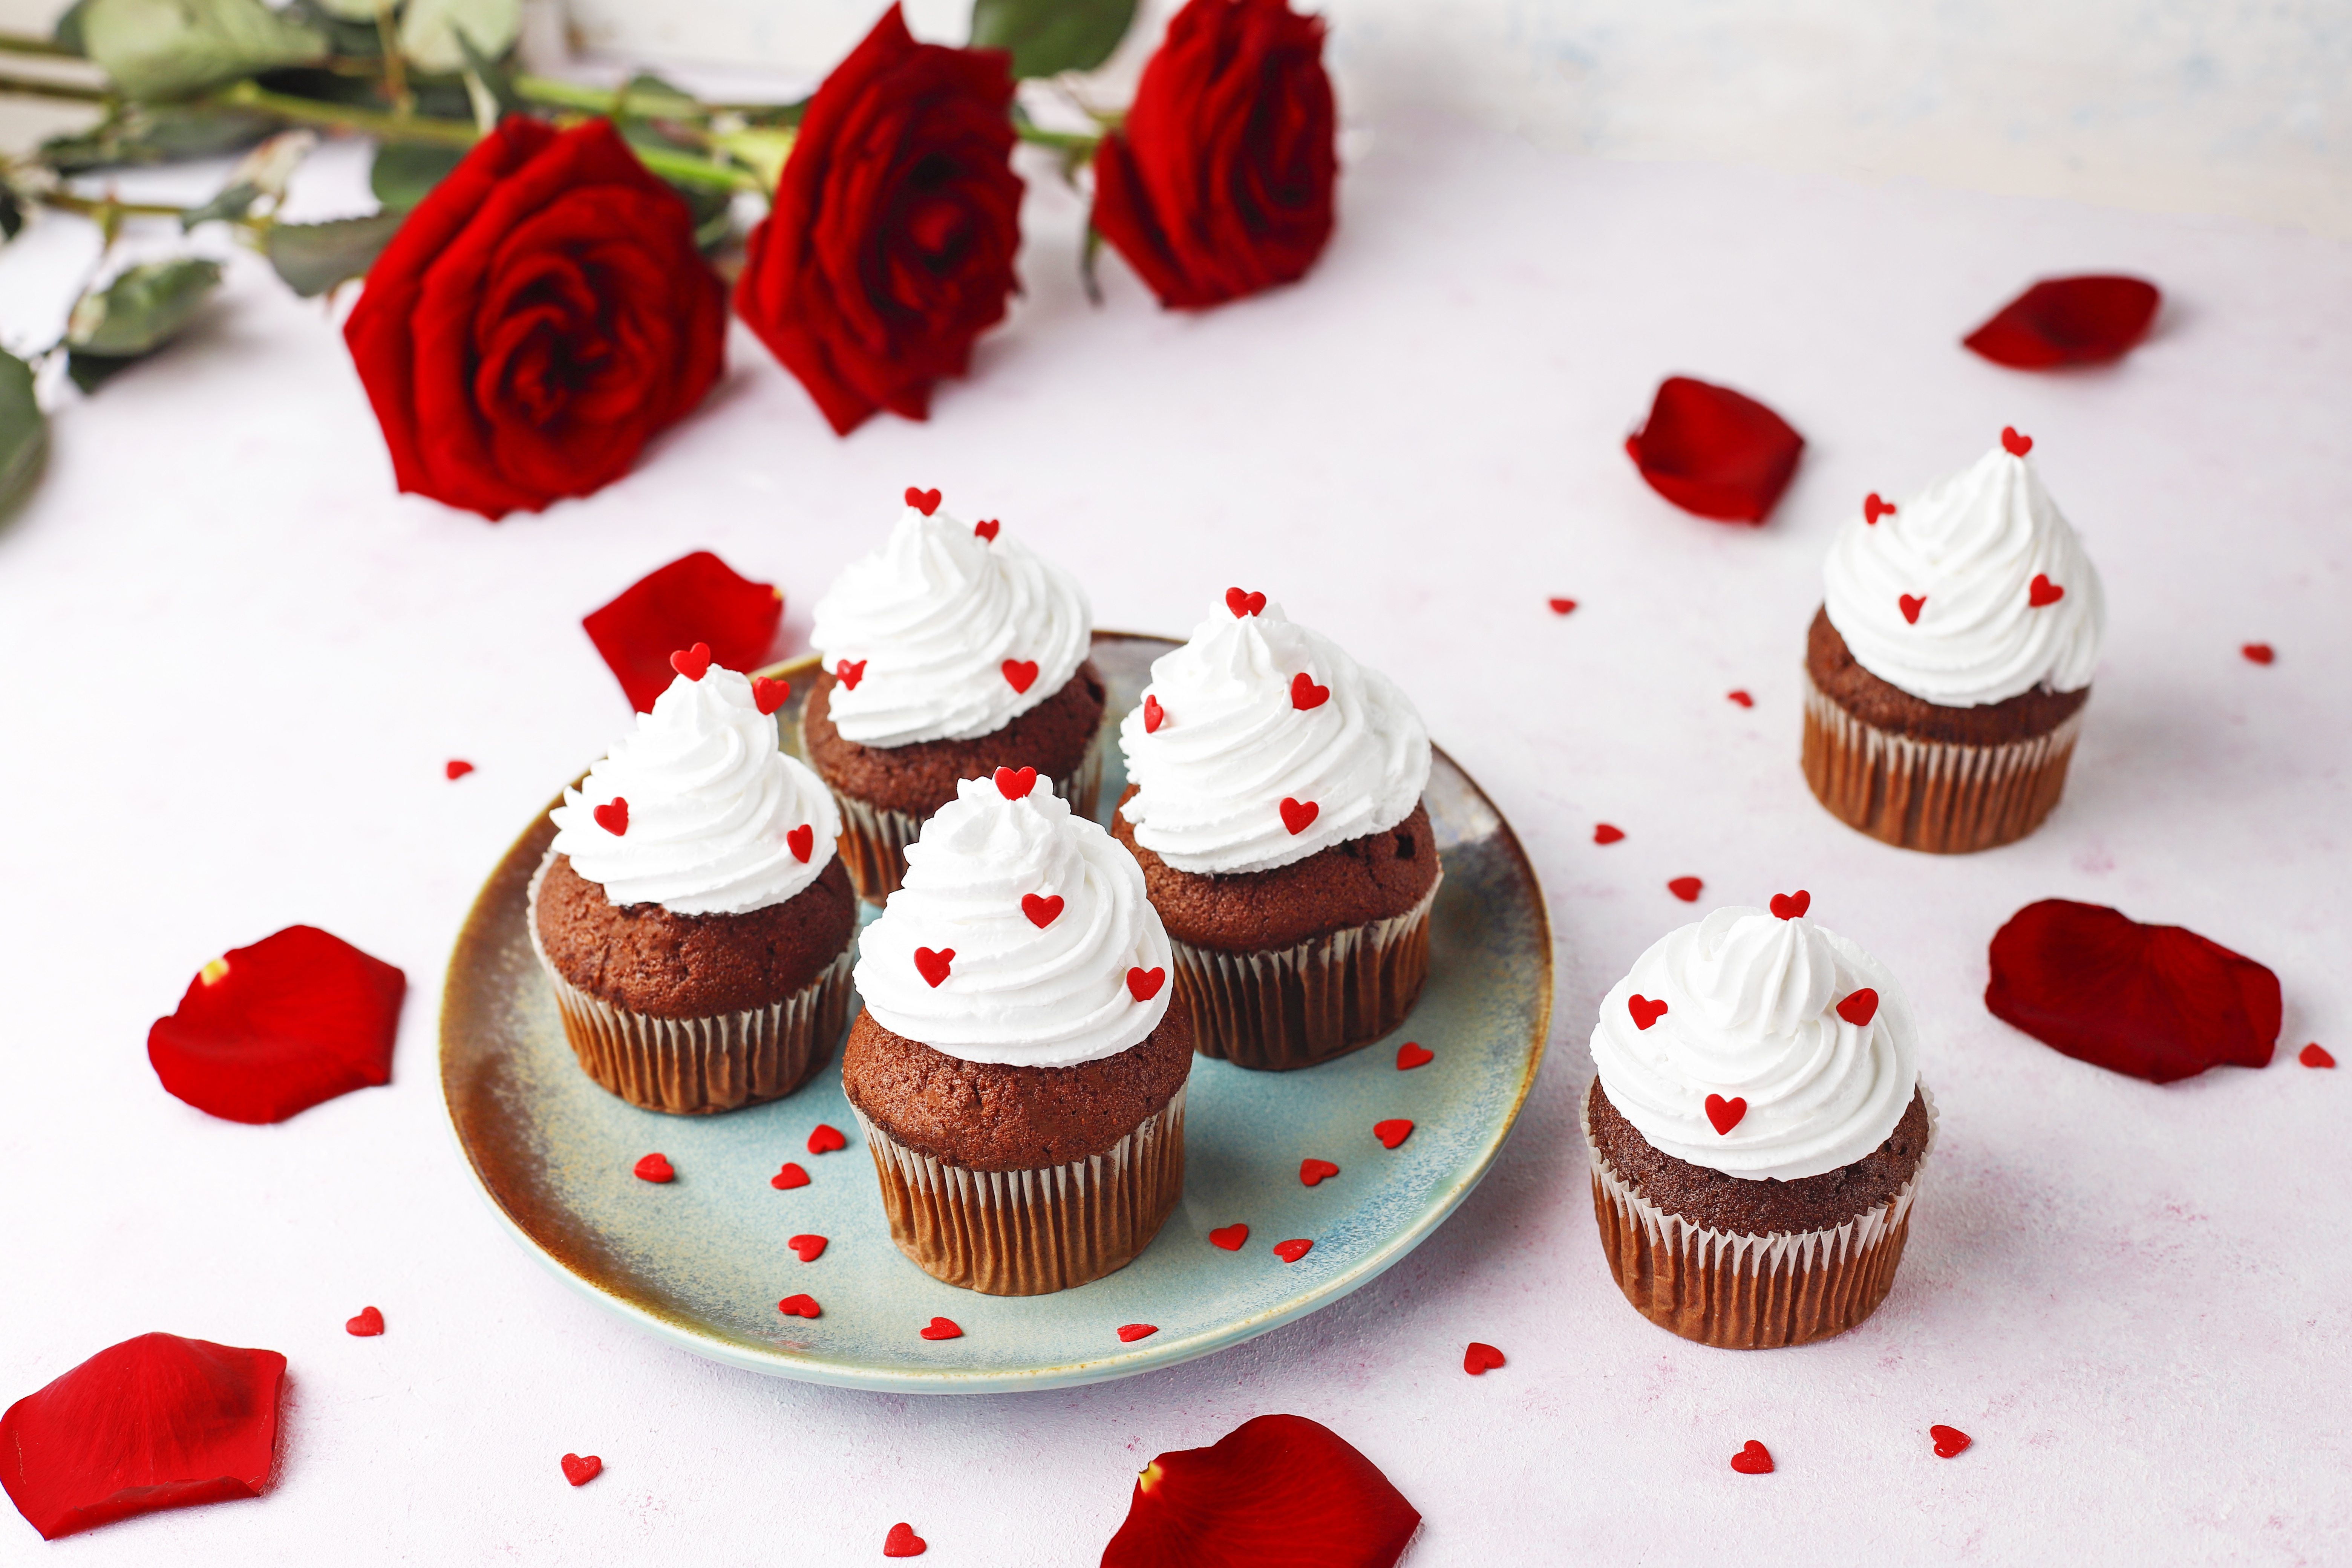 Cream Topped Cupcakes with Hearts and Roses ♥